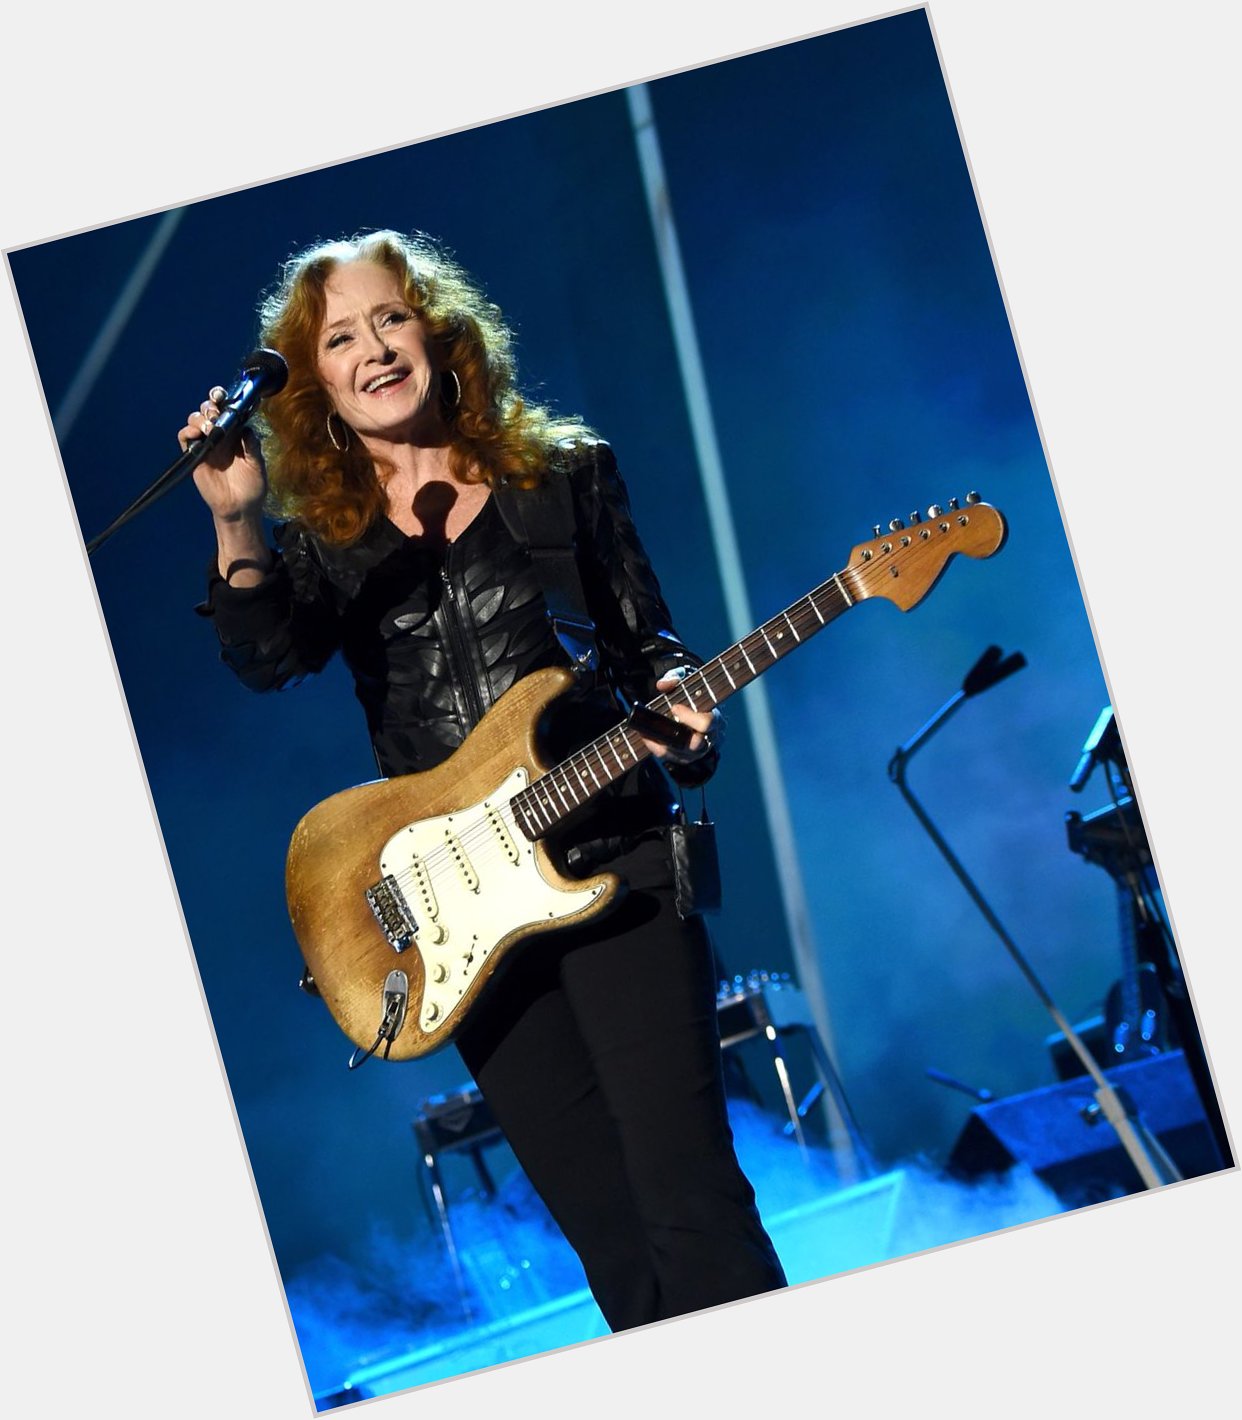 Happy 66th birthday, Bonnie Raitt. Awesome blues singer and picker. Your favorite BR song?  